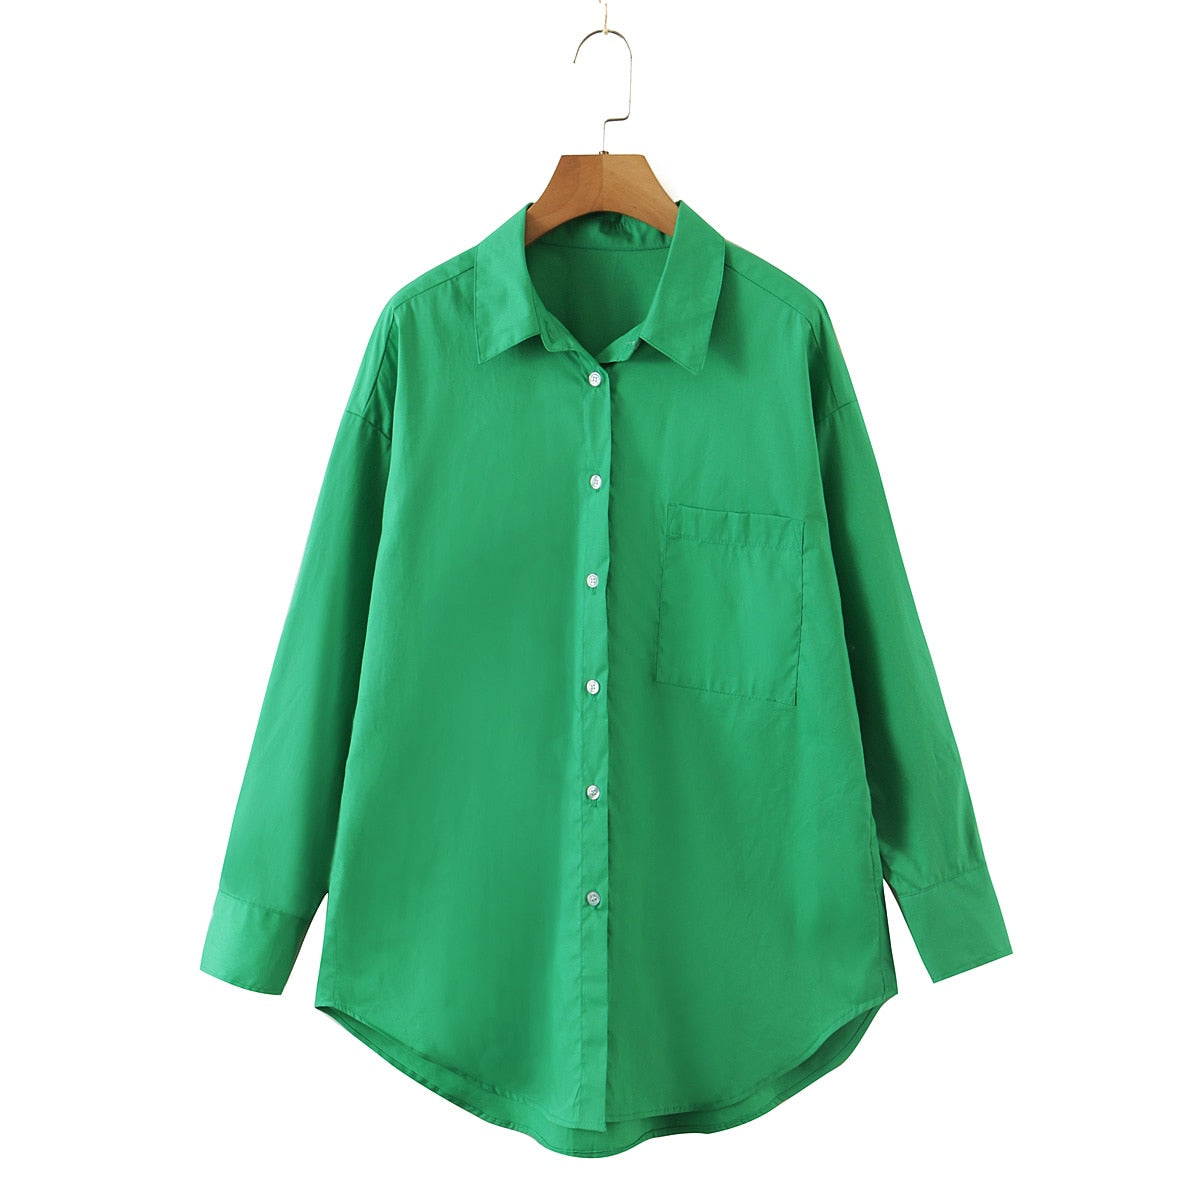 Chicdear New Women Loose Green Blouse Shirt Vintage Pocket Long Sleeve Chemise Femme Lapel Collar Streetwear Blusas Ropa Mujer